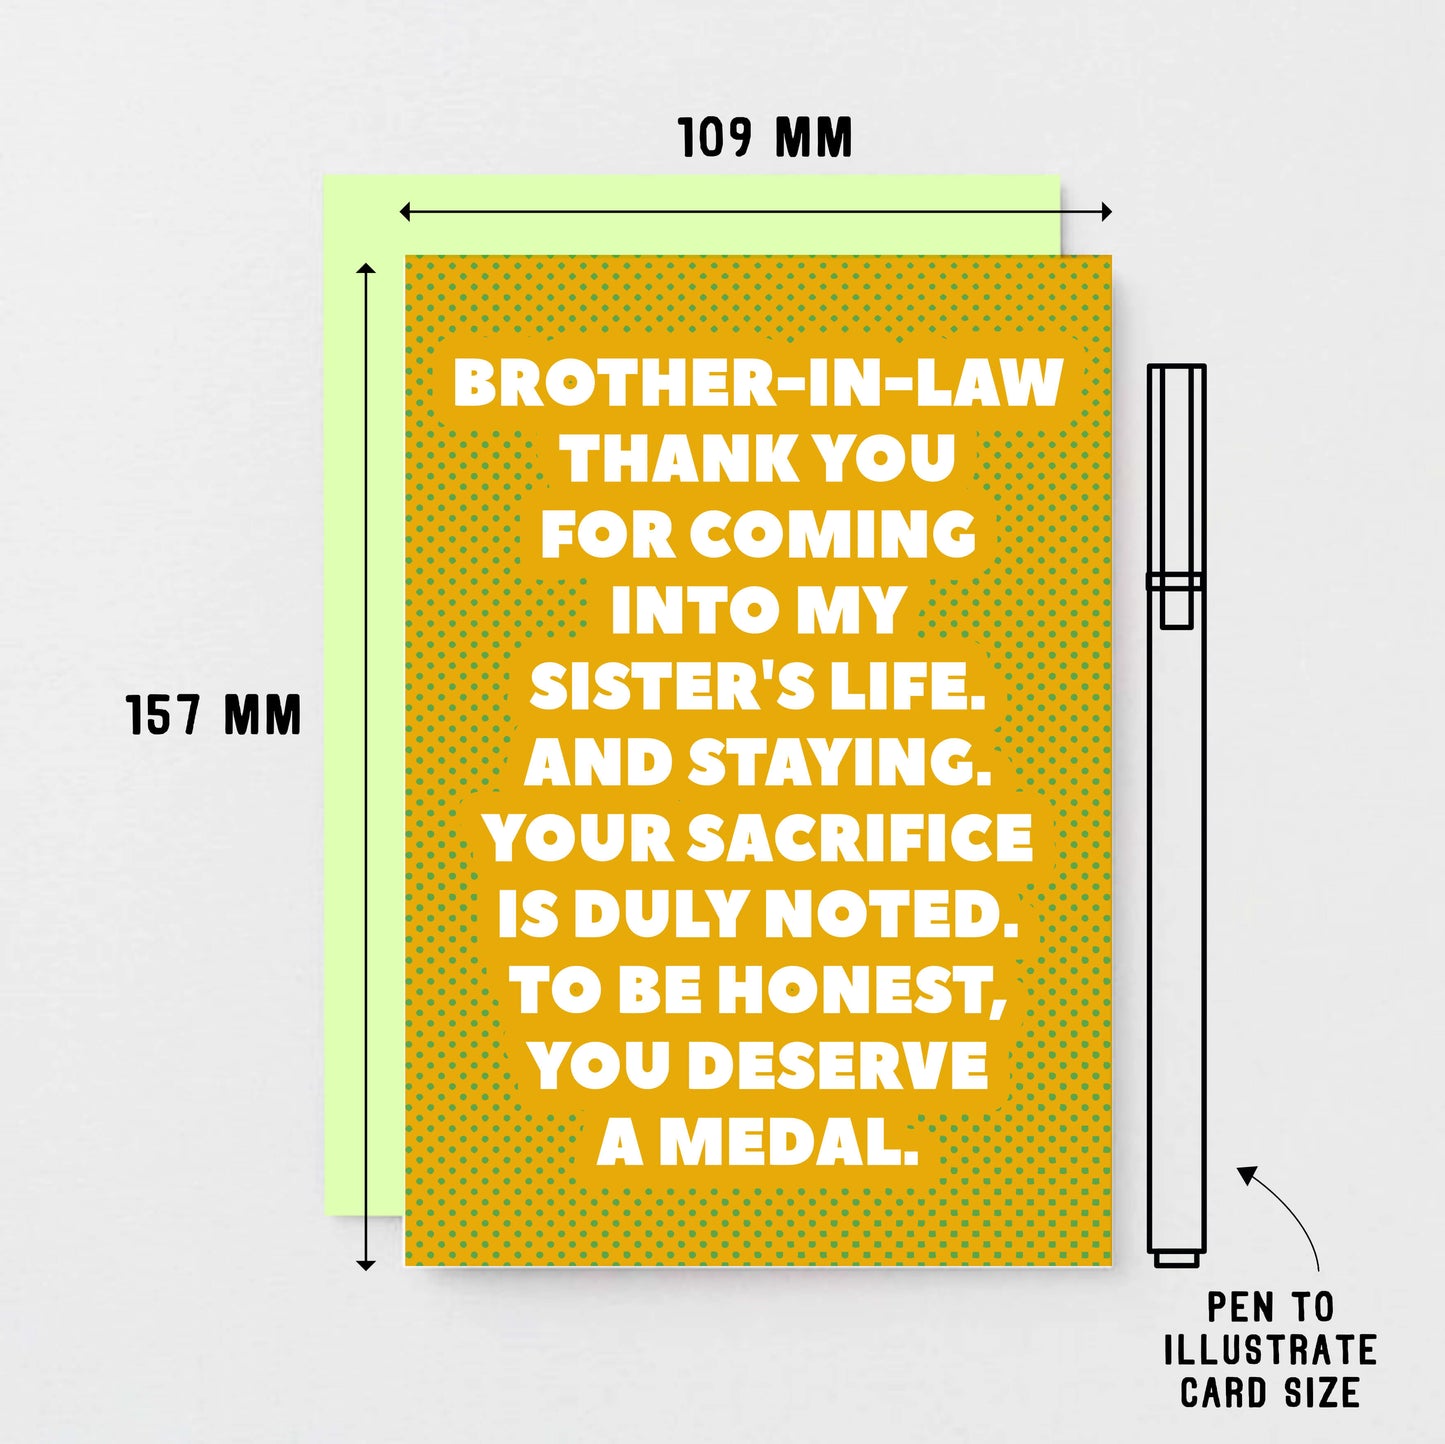 Brother-in-Law Card by SixElevenCreations. Reads Brother-in-law Thank you for coming into my sister's life. And staying. Your sacrifice is duly noted. To be honest, you deserve a medal. Product Code SE2704A6